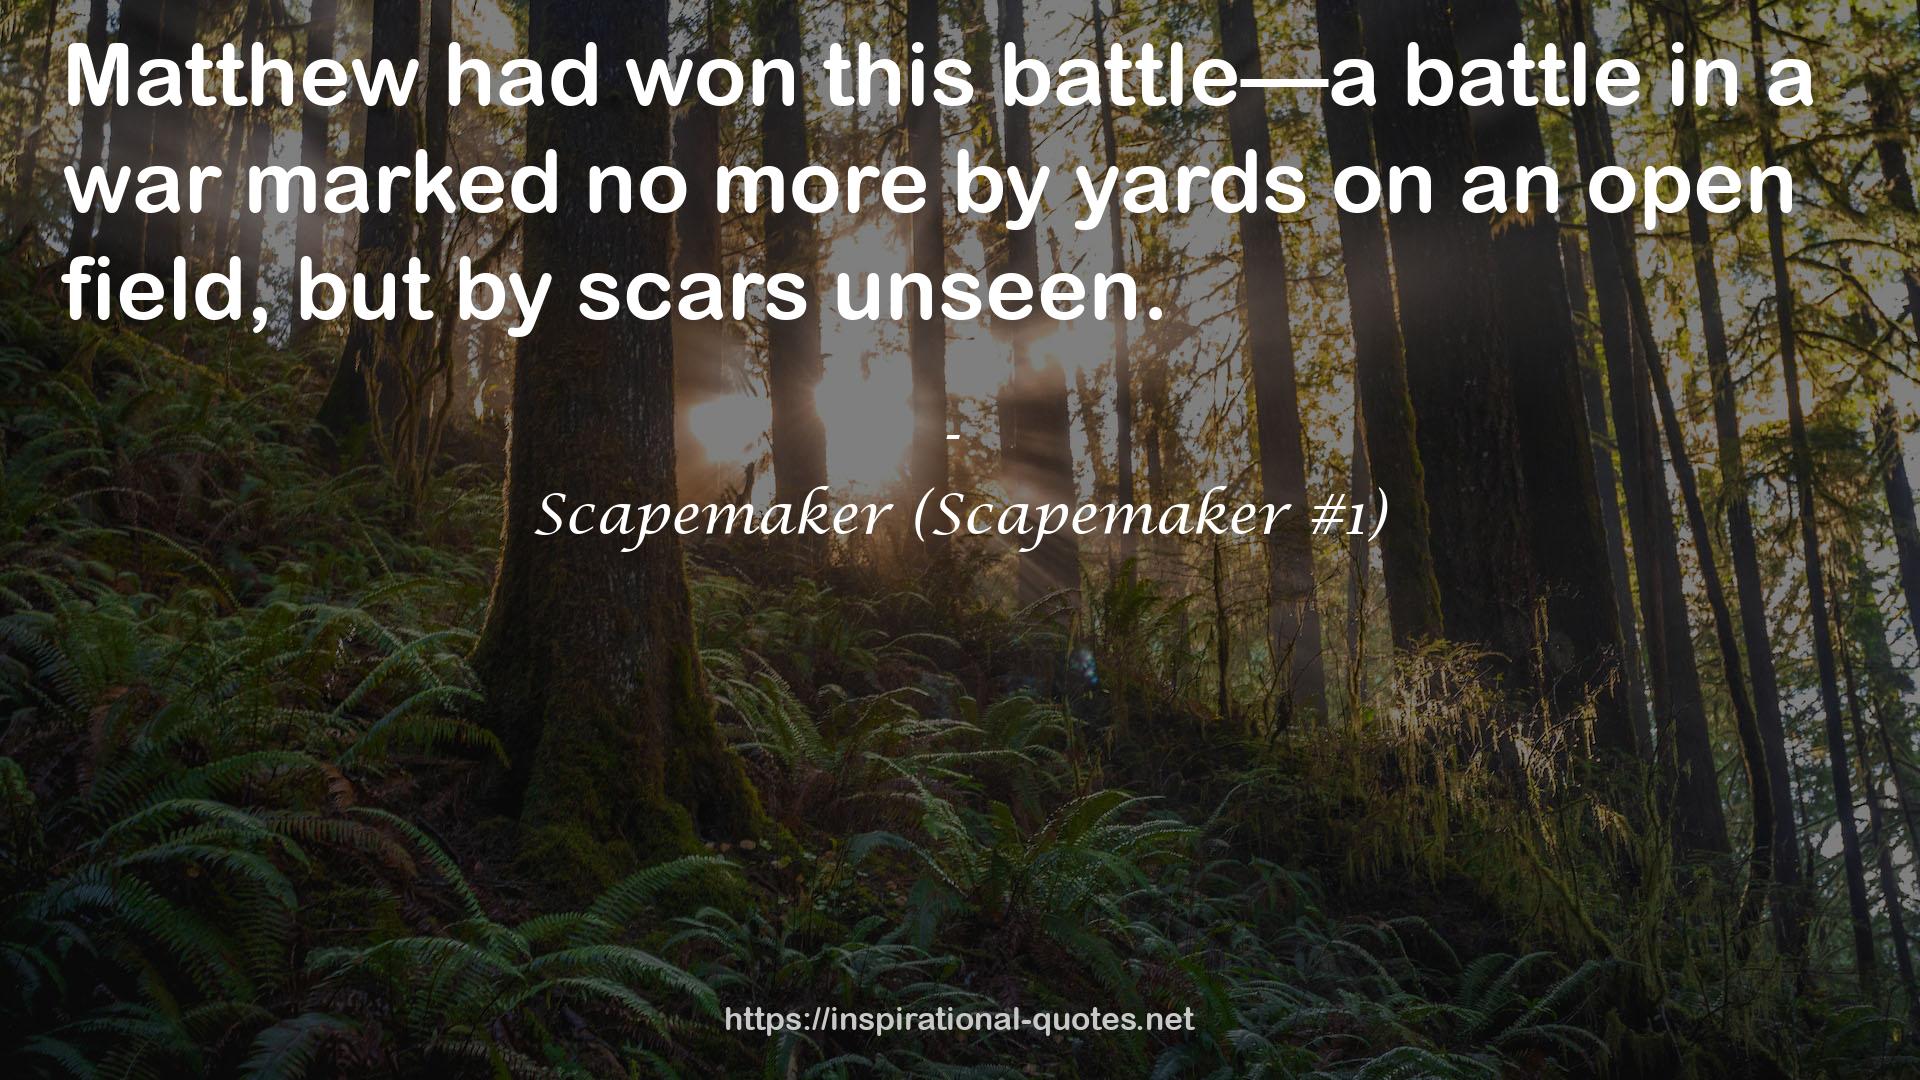 Scapemaker (Scapemaker #1) QUOTES